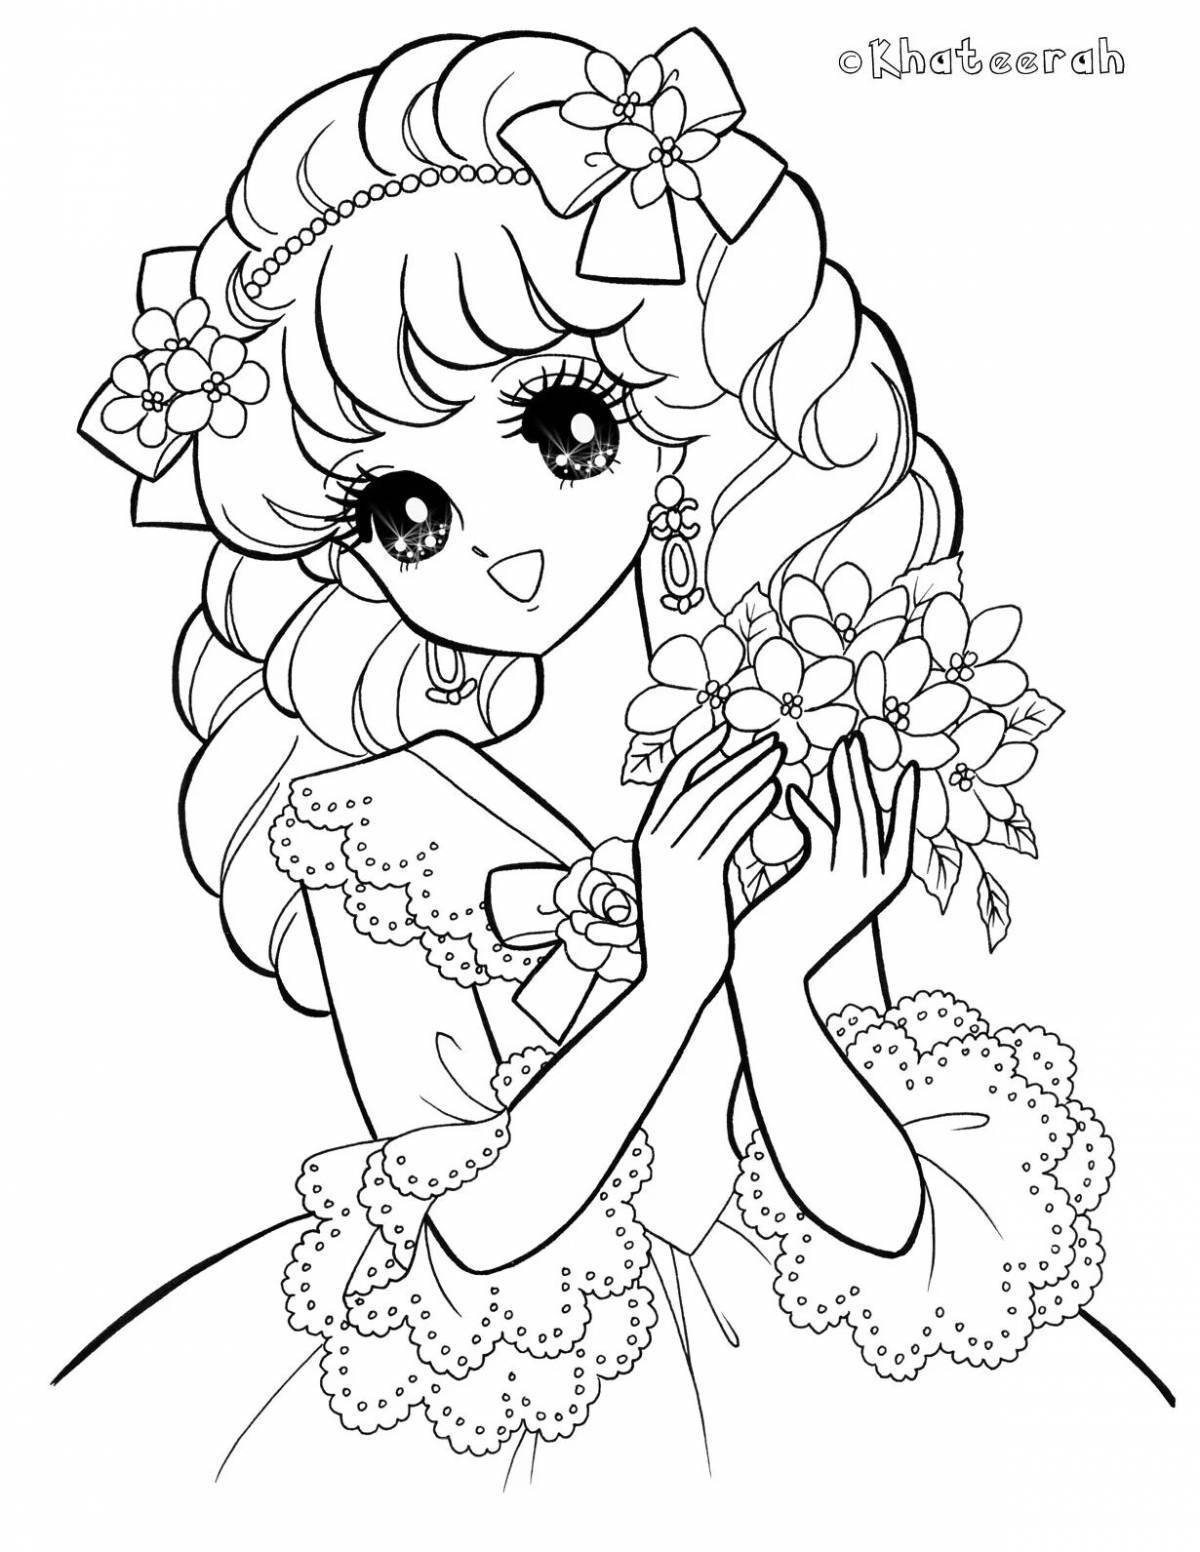 Miss tee coloring book